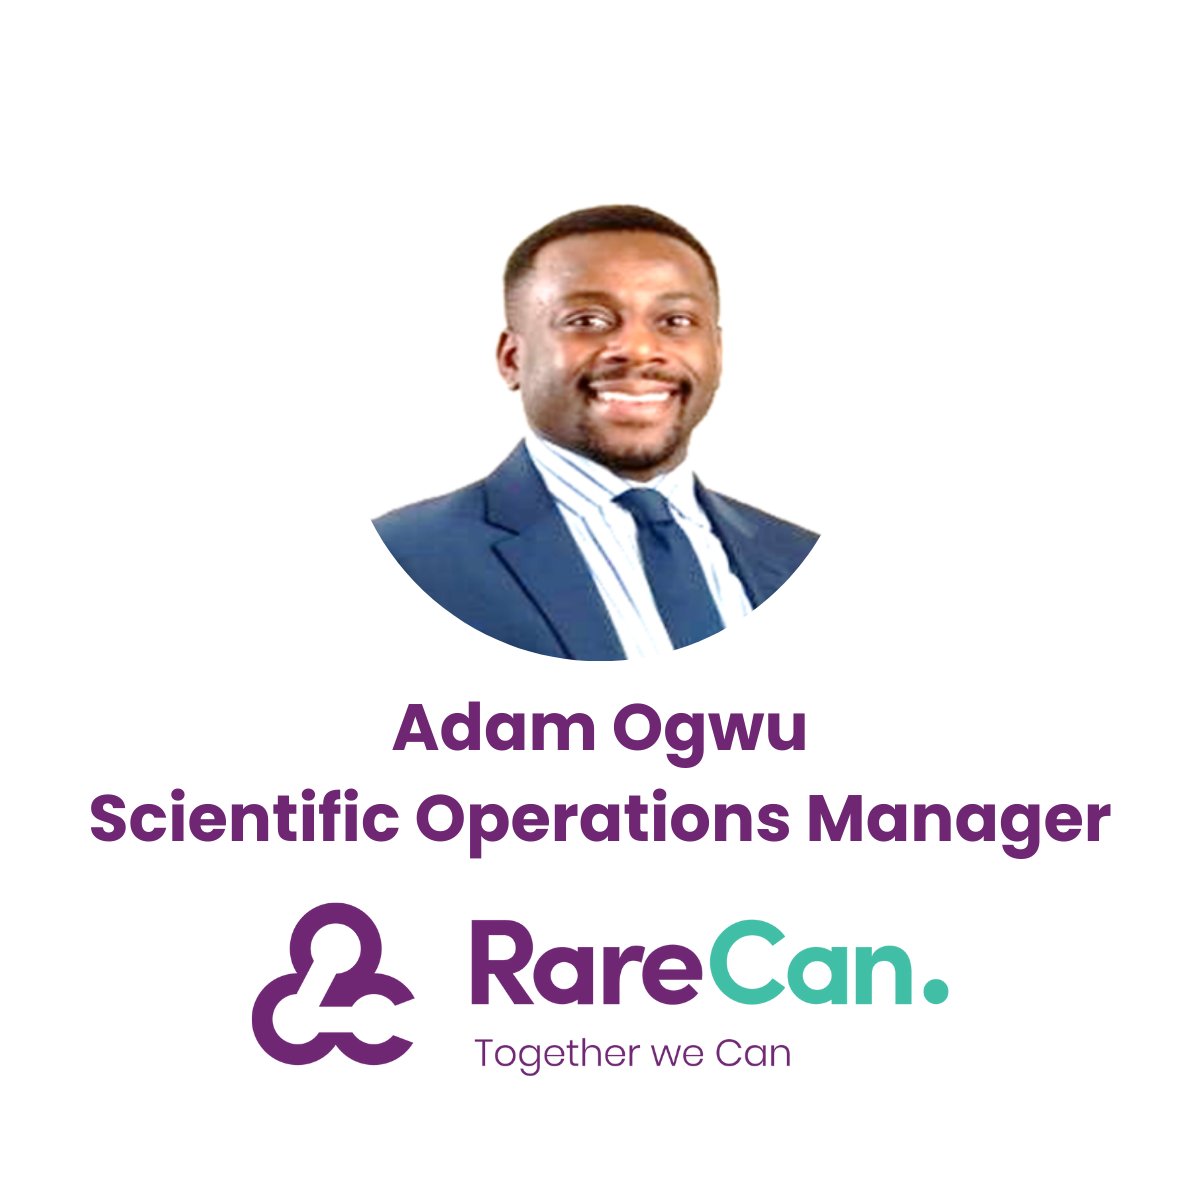 The newest member to welcome to our team this month is Adam Ogwu. Adam joins us with a breadth of knowledge from the pharmaceutical industry and supply chain projects and we are delighted to have him on board. #talent #teambuilding #cancerresearch #togetherwecan